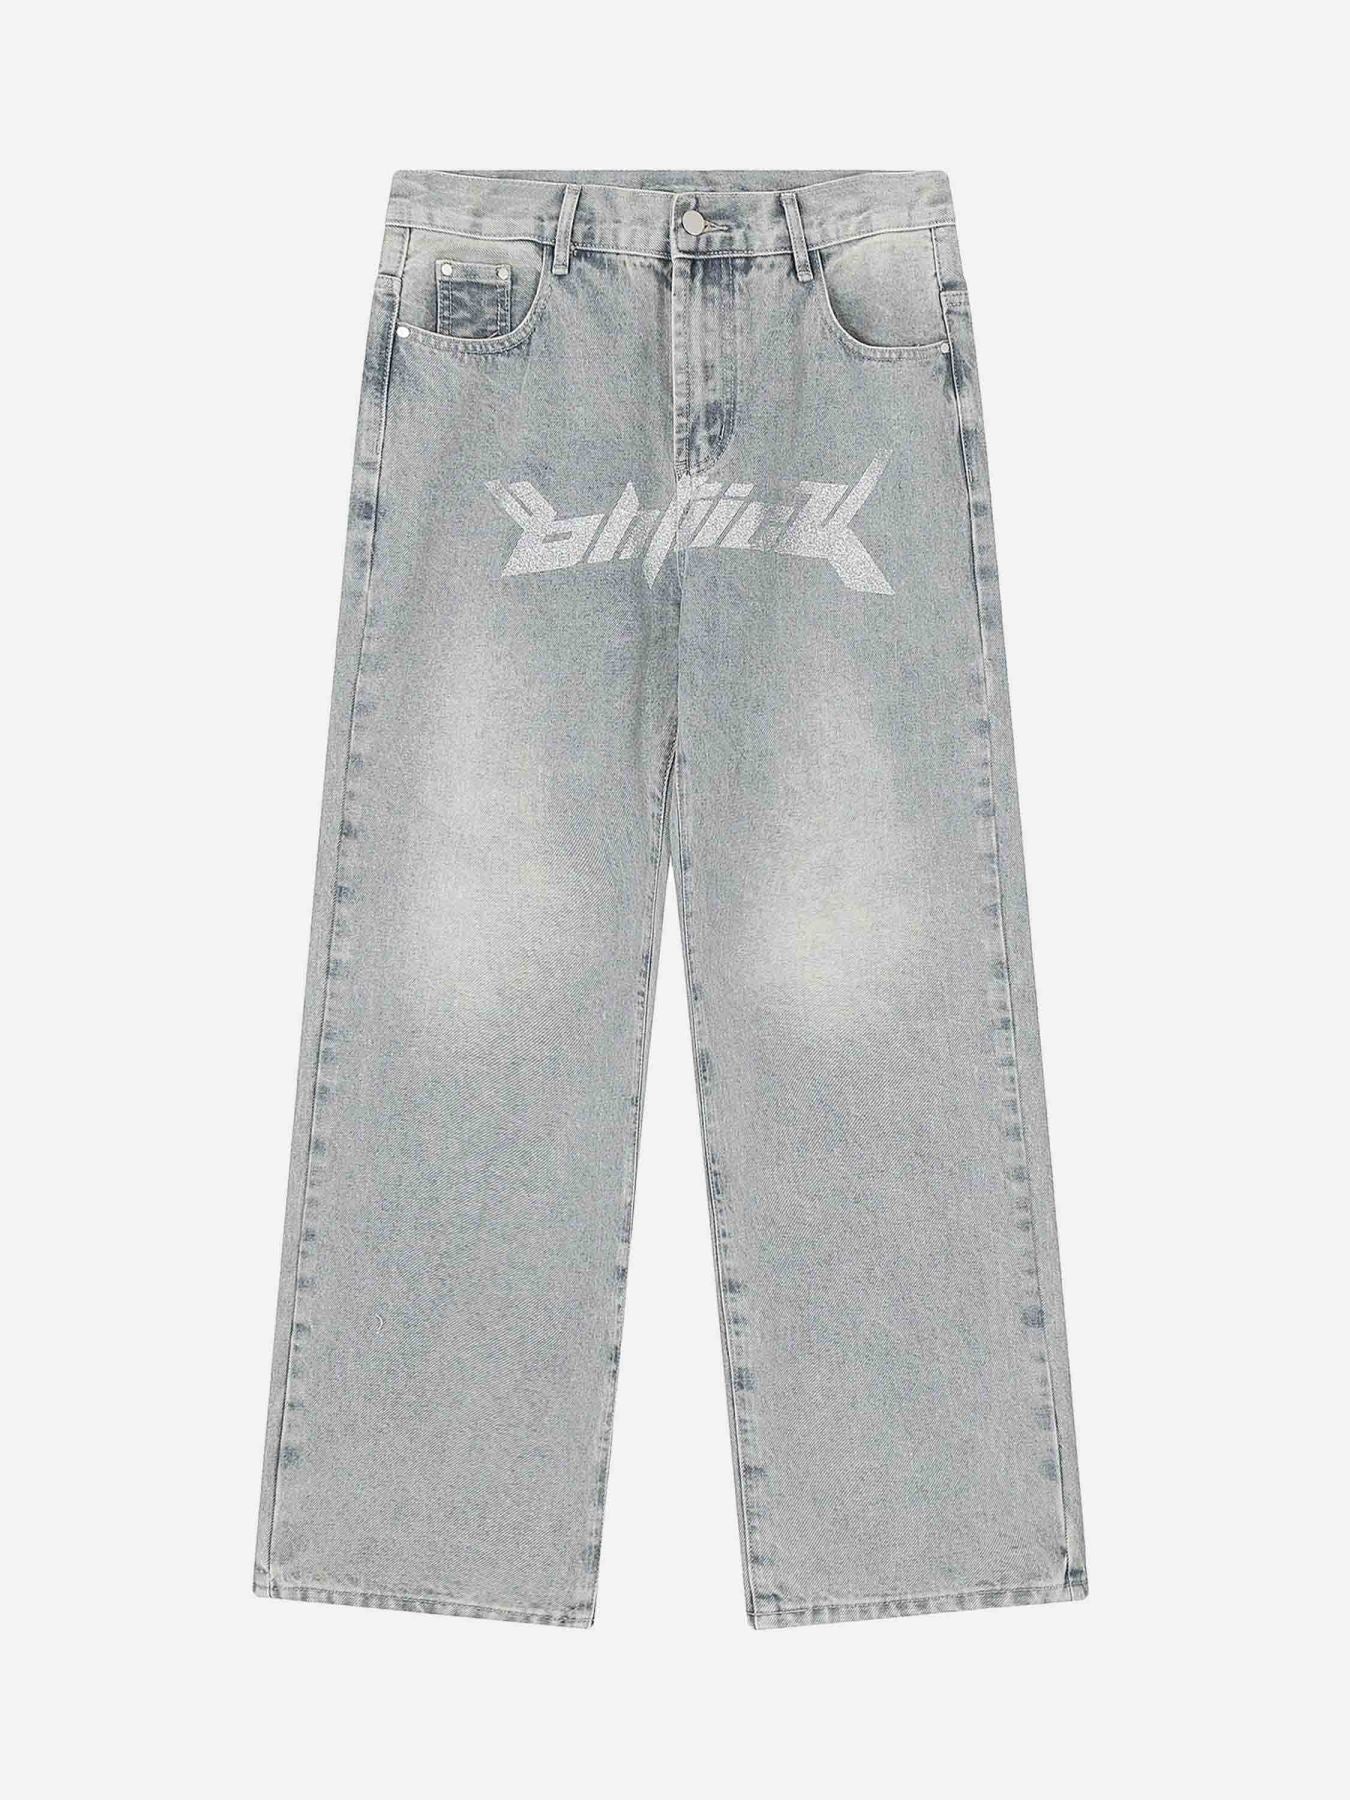 Thesupermade Dark Letter Print Jeans